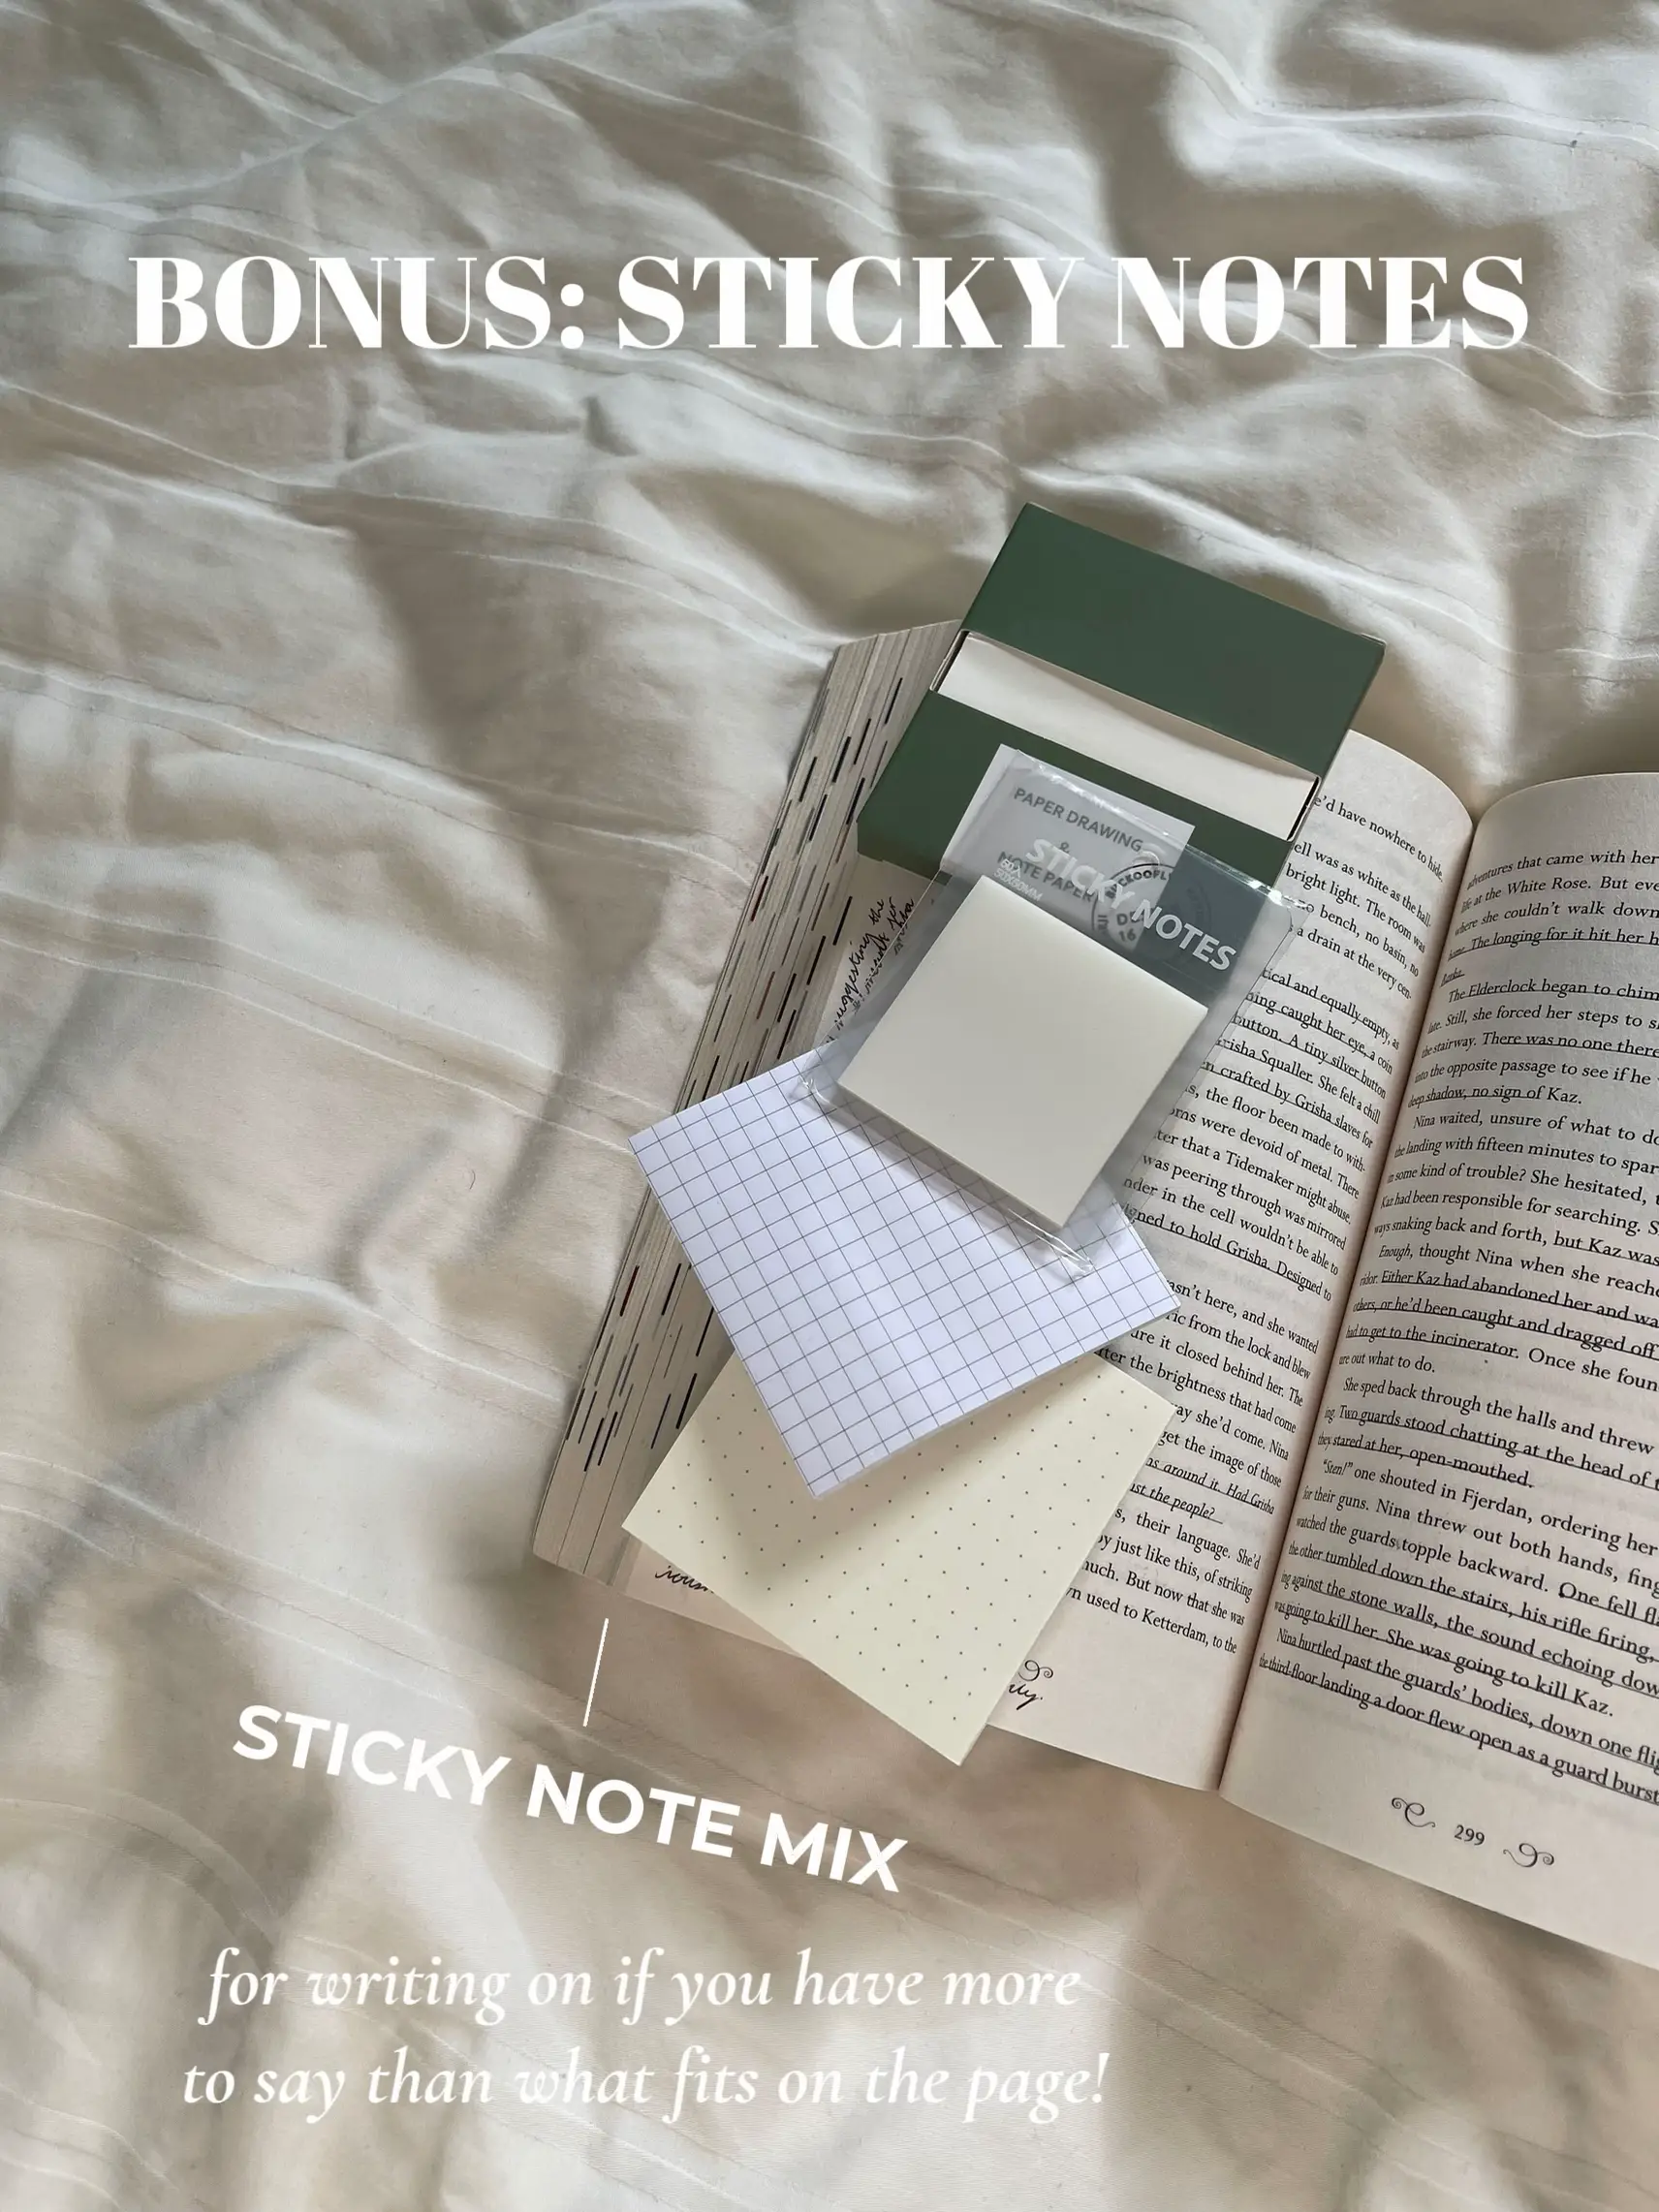 All my favorite supplies 🤍 #bookannotations #annotating #annotatingbo